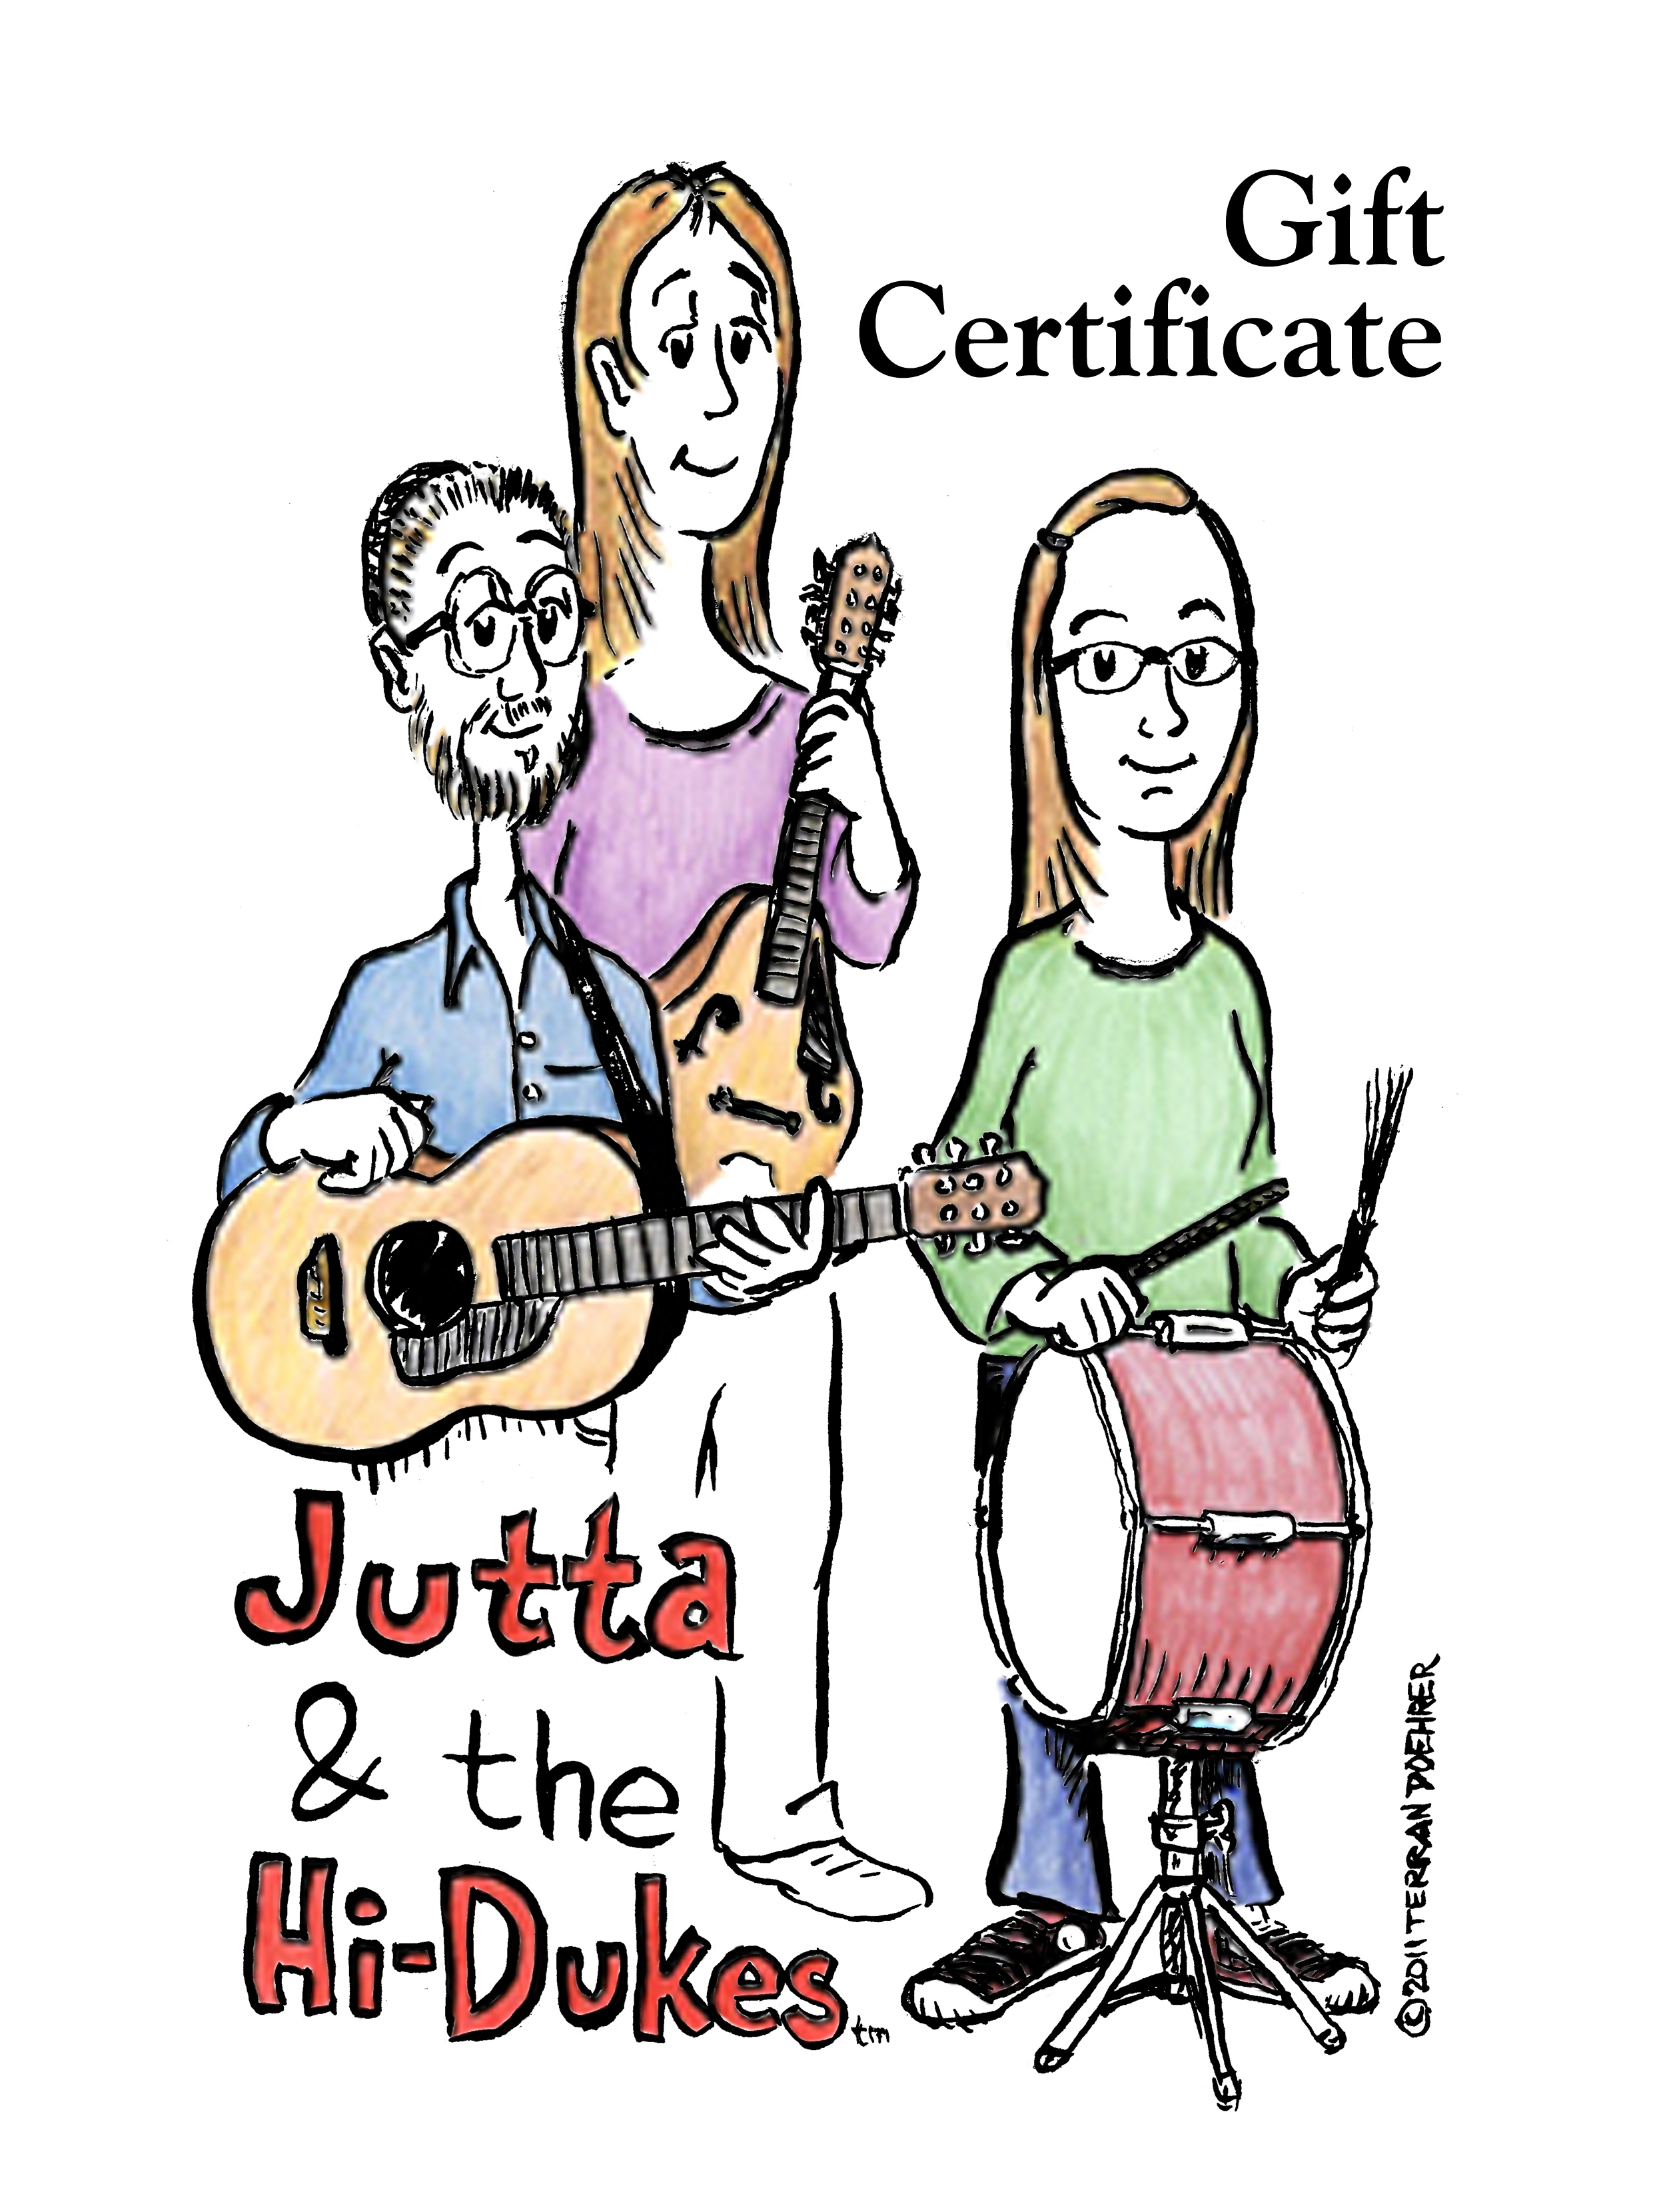 Front side of a Hi-Dukes Gift Certificate with a cartoon drawing of the band as a trio.